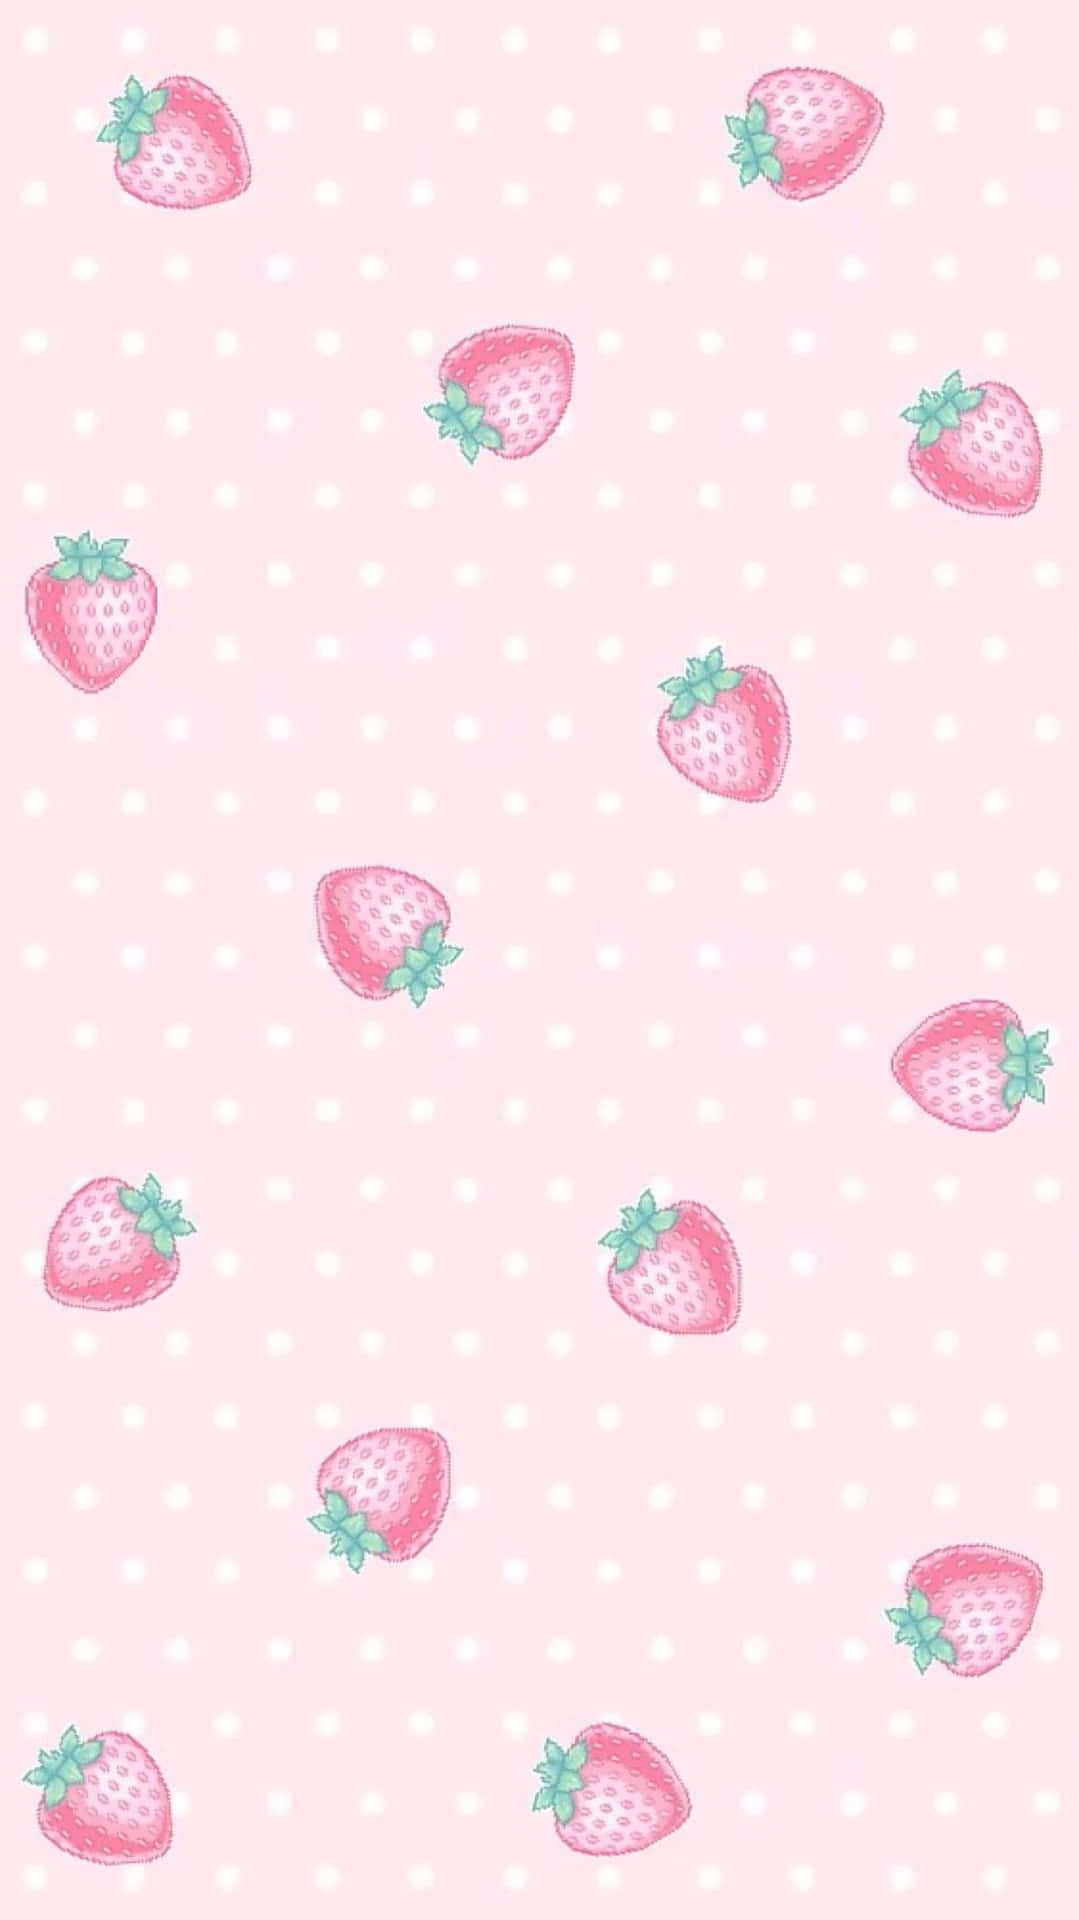 Cute girly strawberry wallpaper for iPhone with high-resolution 1080x1920 pixel. You can use this wallpaper for your iPhone 5, 6, 7, 8, X, XS, XR backgrounds, Mobile Screensaver, or iPad Lock Screen - Strawberry